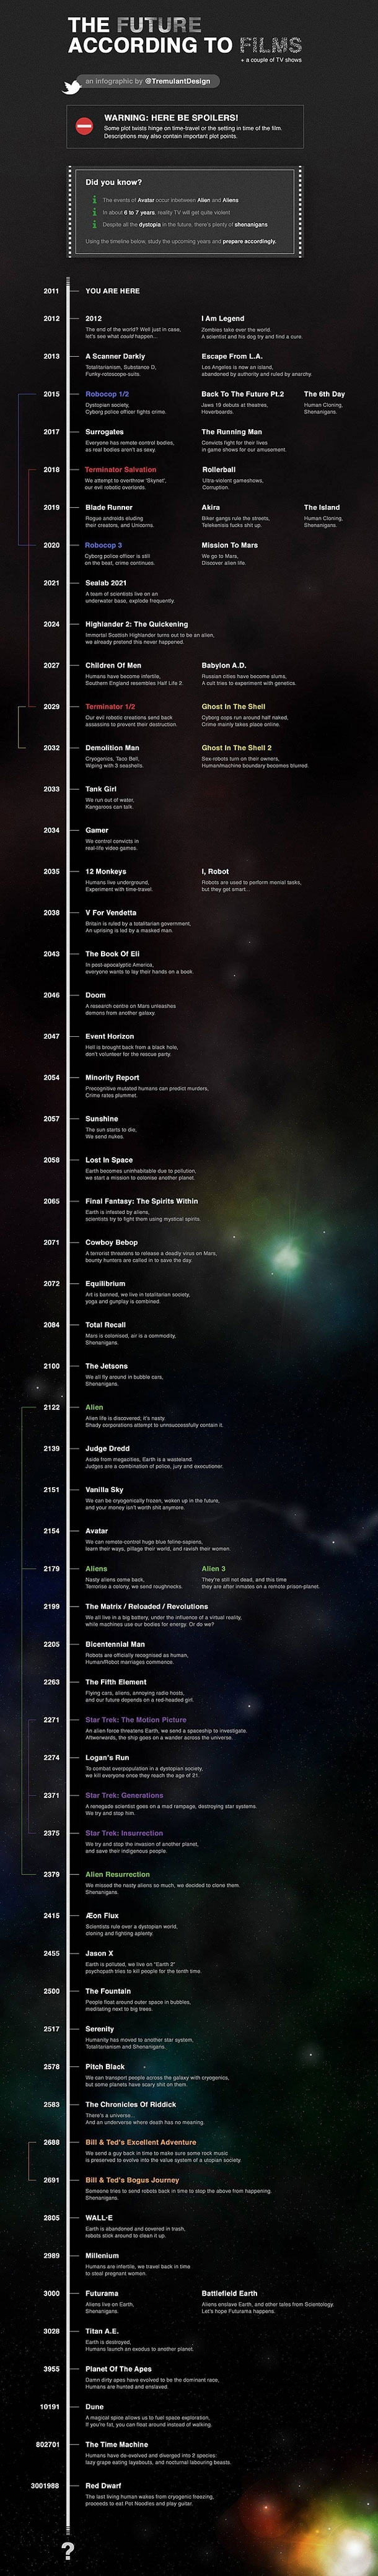 Future According To Sci-Fi Films Infographic 